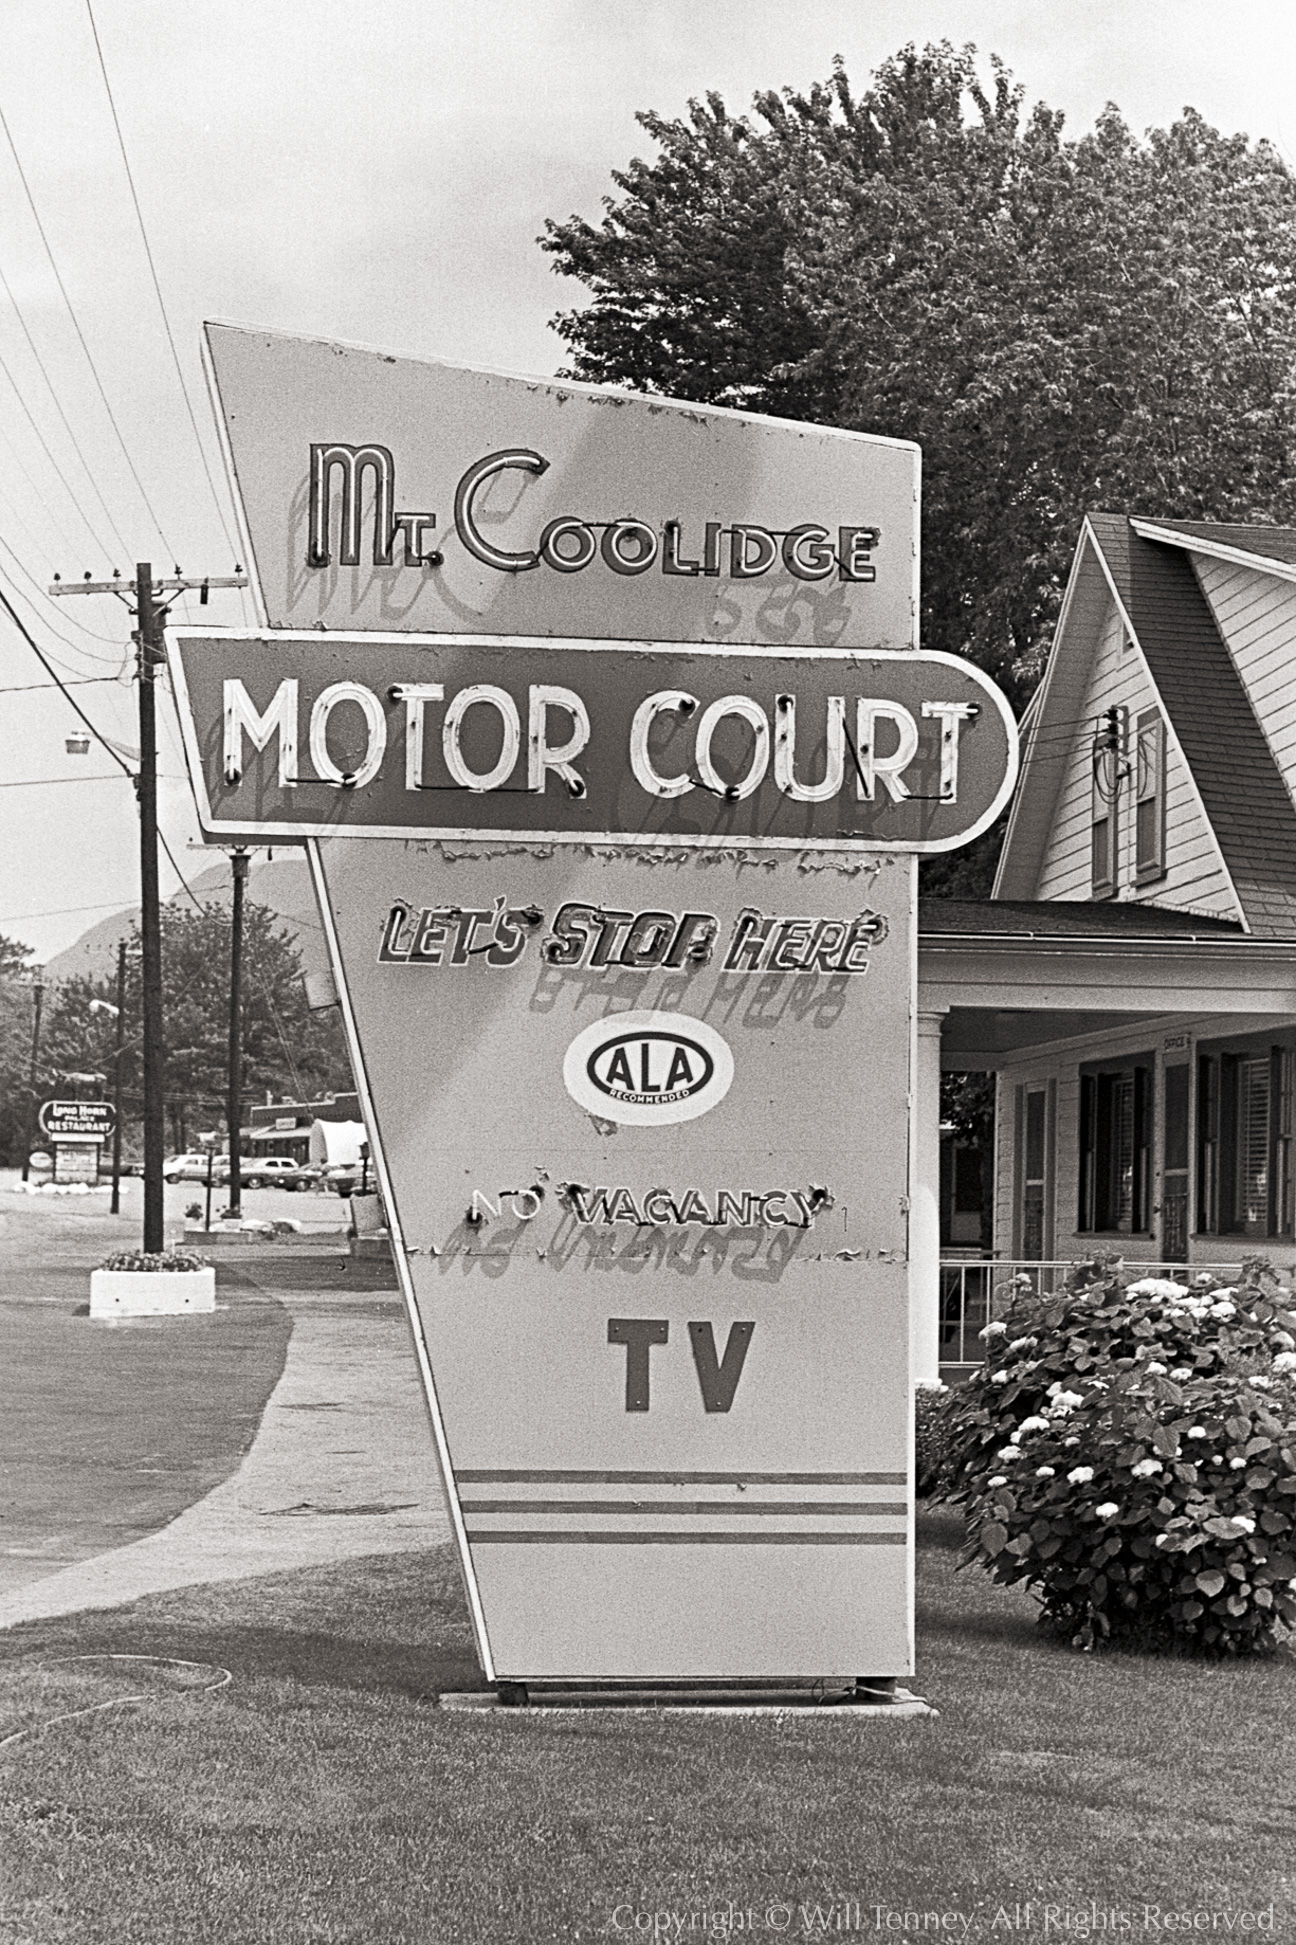 Mt. Coolidge Motor Court: Photograph by Will Tenney